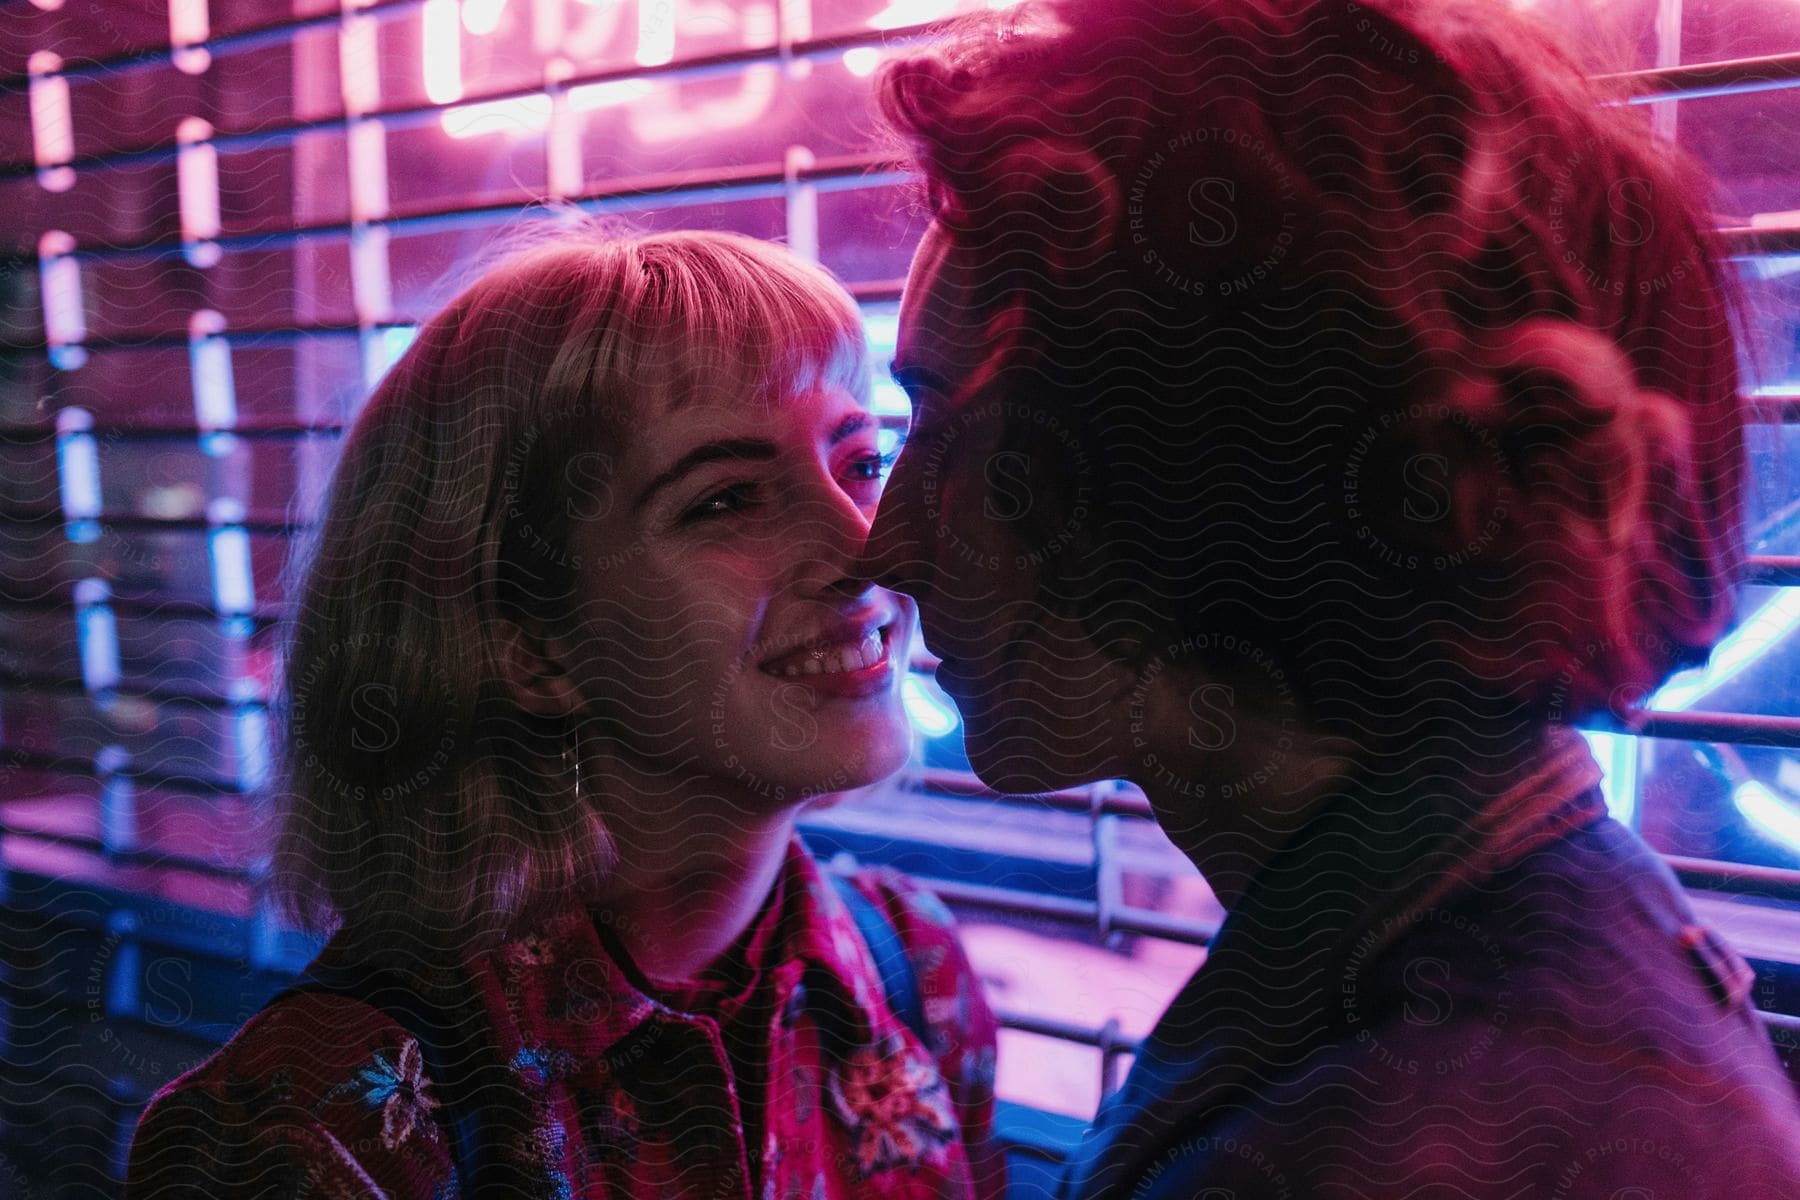 A young couple stand next to a gated storefront with pink and blue florescent light touching noses